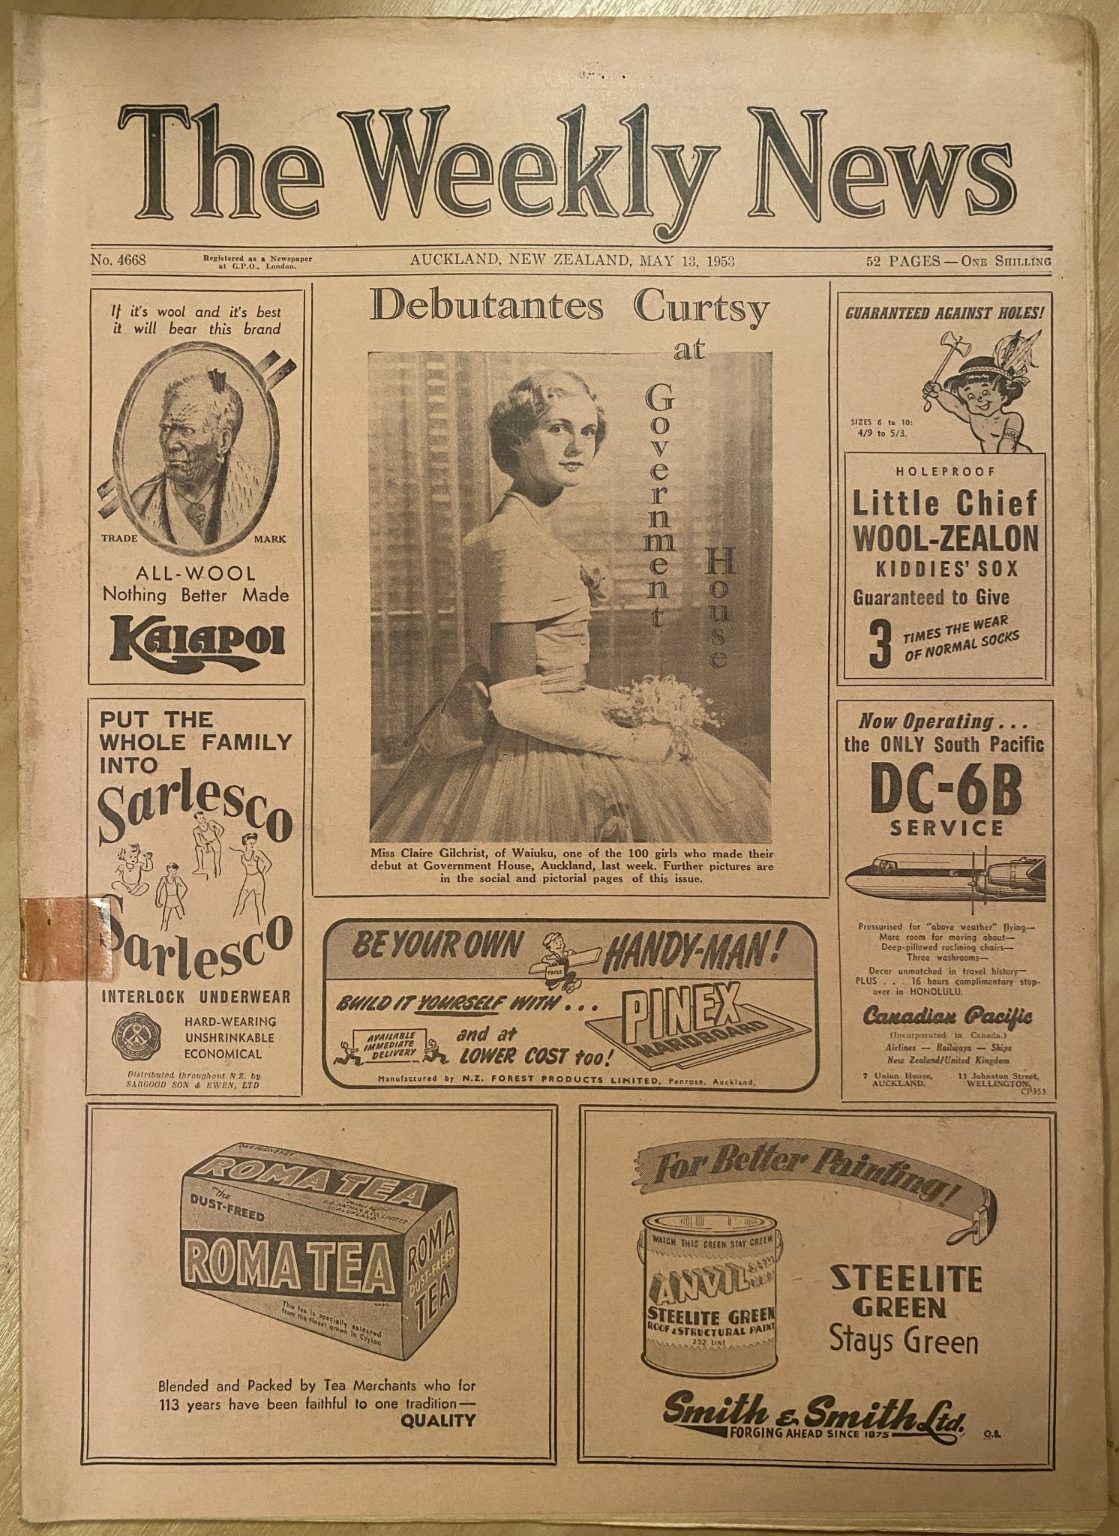 OLD NEWSPAPER: The Weekly News - No. 4668, 13 May 1953